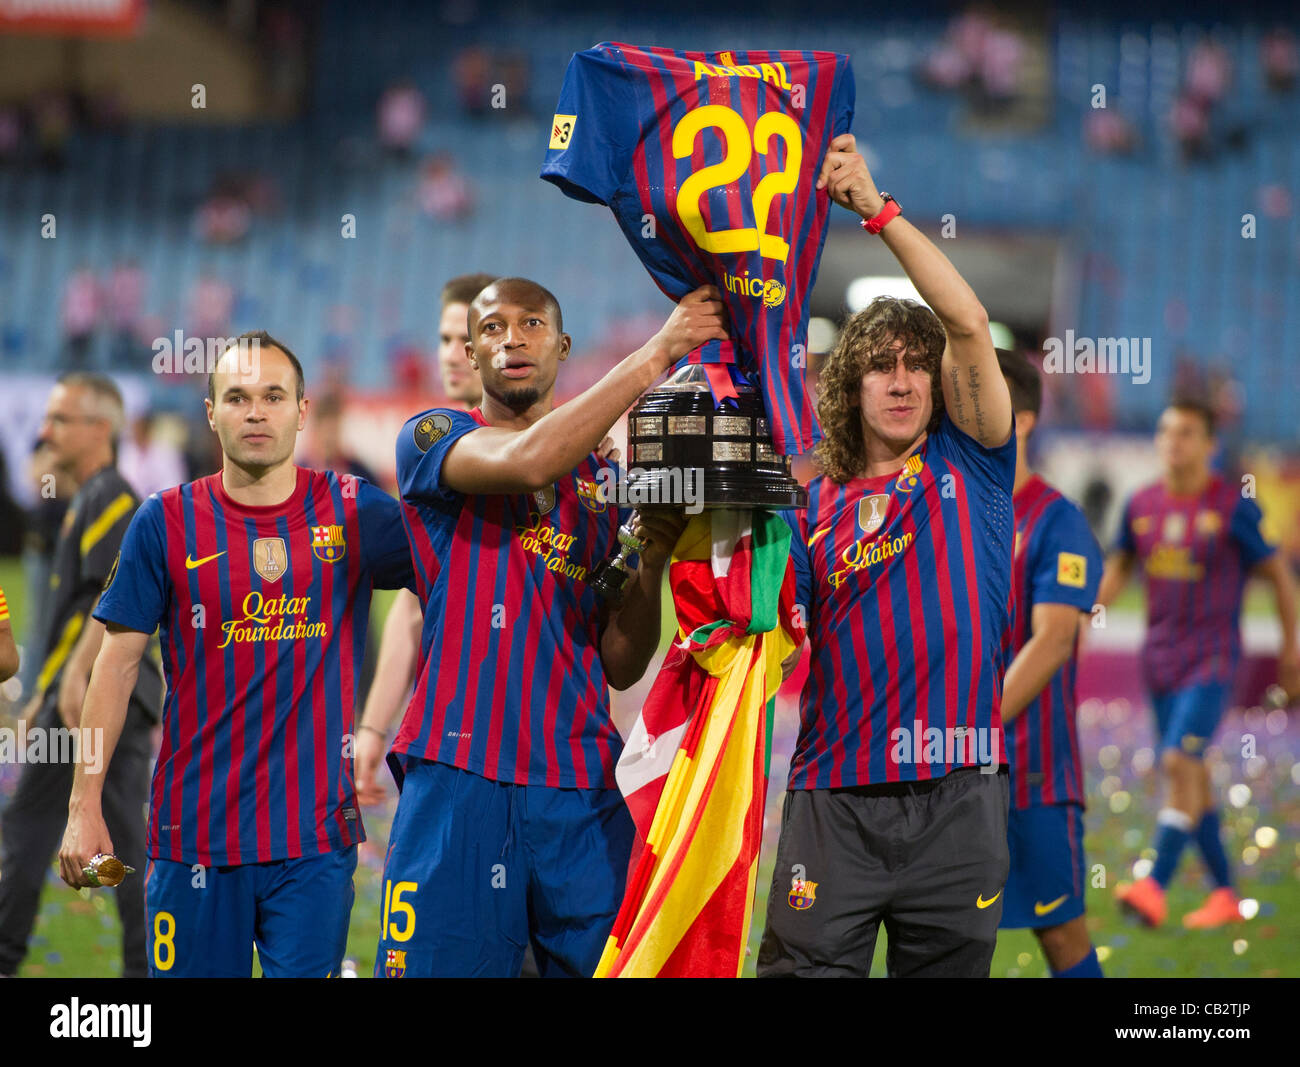 MADRID, SPAIN - MAY 25:  Seidou Keita and Carles Puyol from F.C.Barcelona,  hold the trophy wearing their injured teammate Abidal's shirt after beating Athletic de Bilbao in the Copa del Rey Final for 3-0 at Vicente Calderon Stadium on May 25, 2012 in Madrid, Spain. (Credits : J.M.Colomo/GRUPPO) Stock Photo